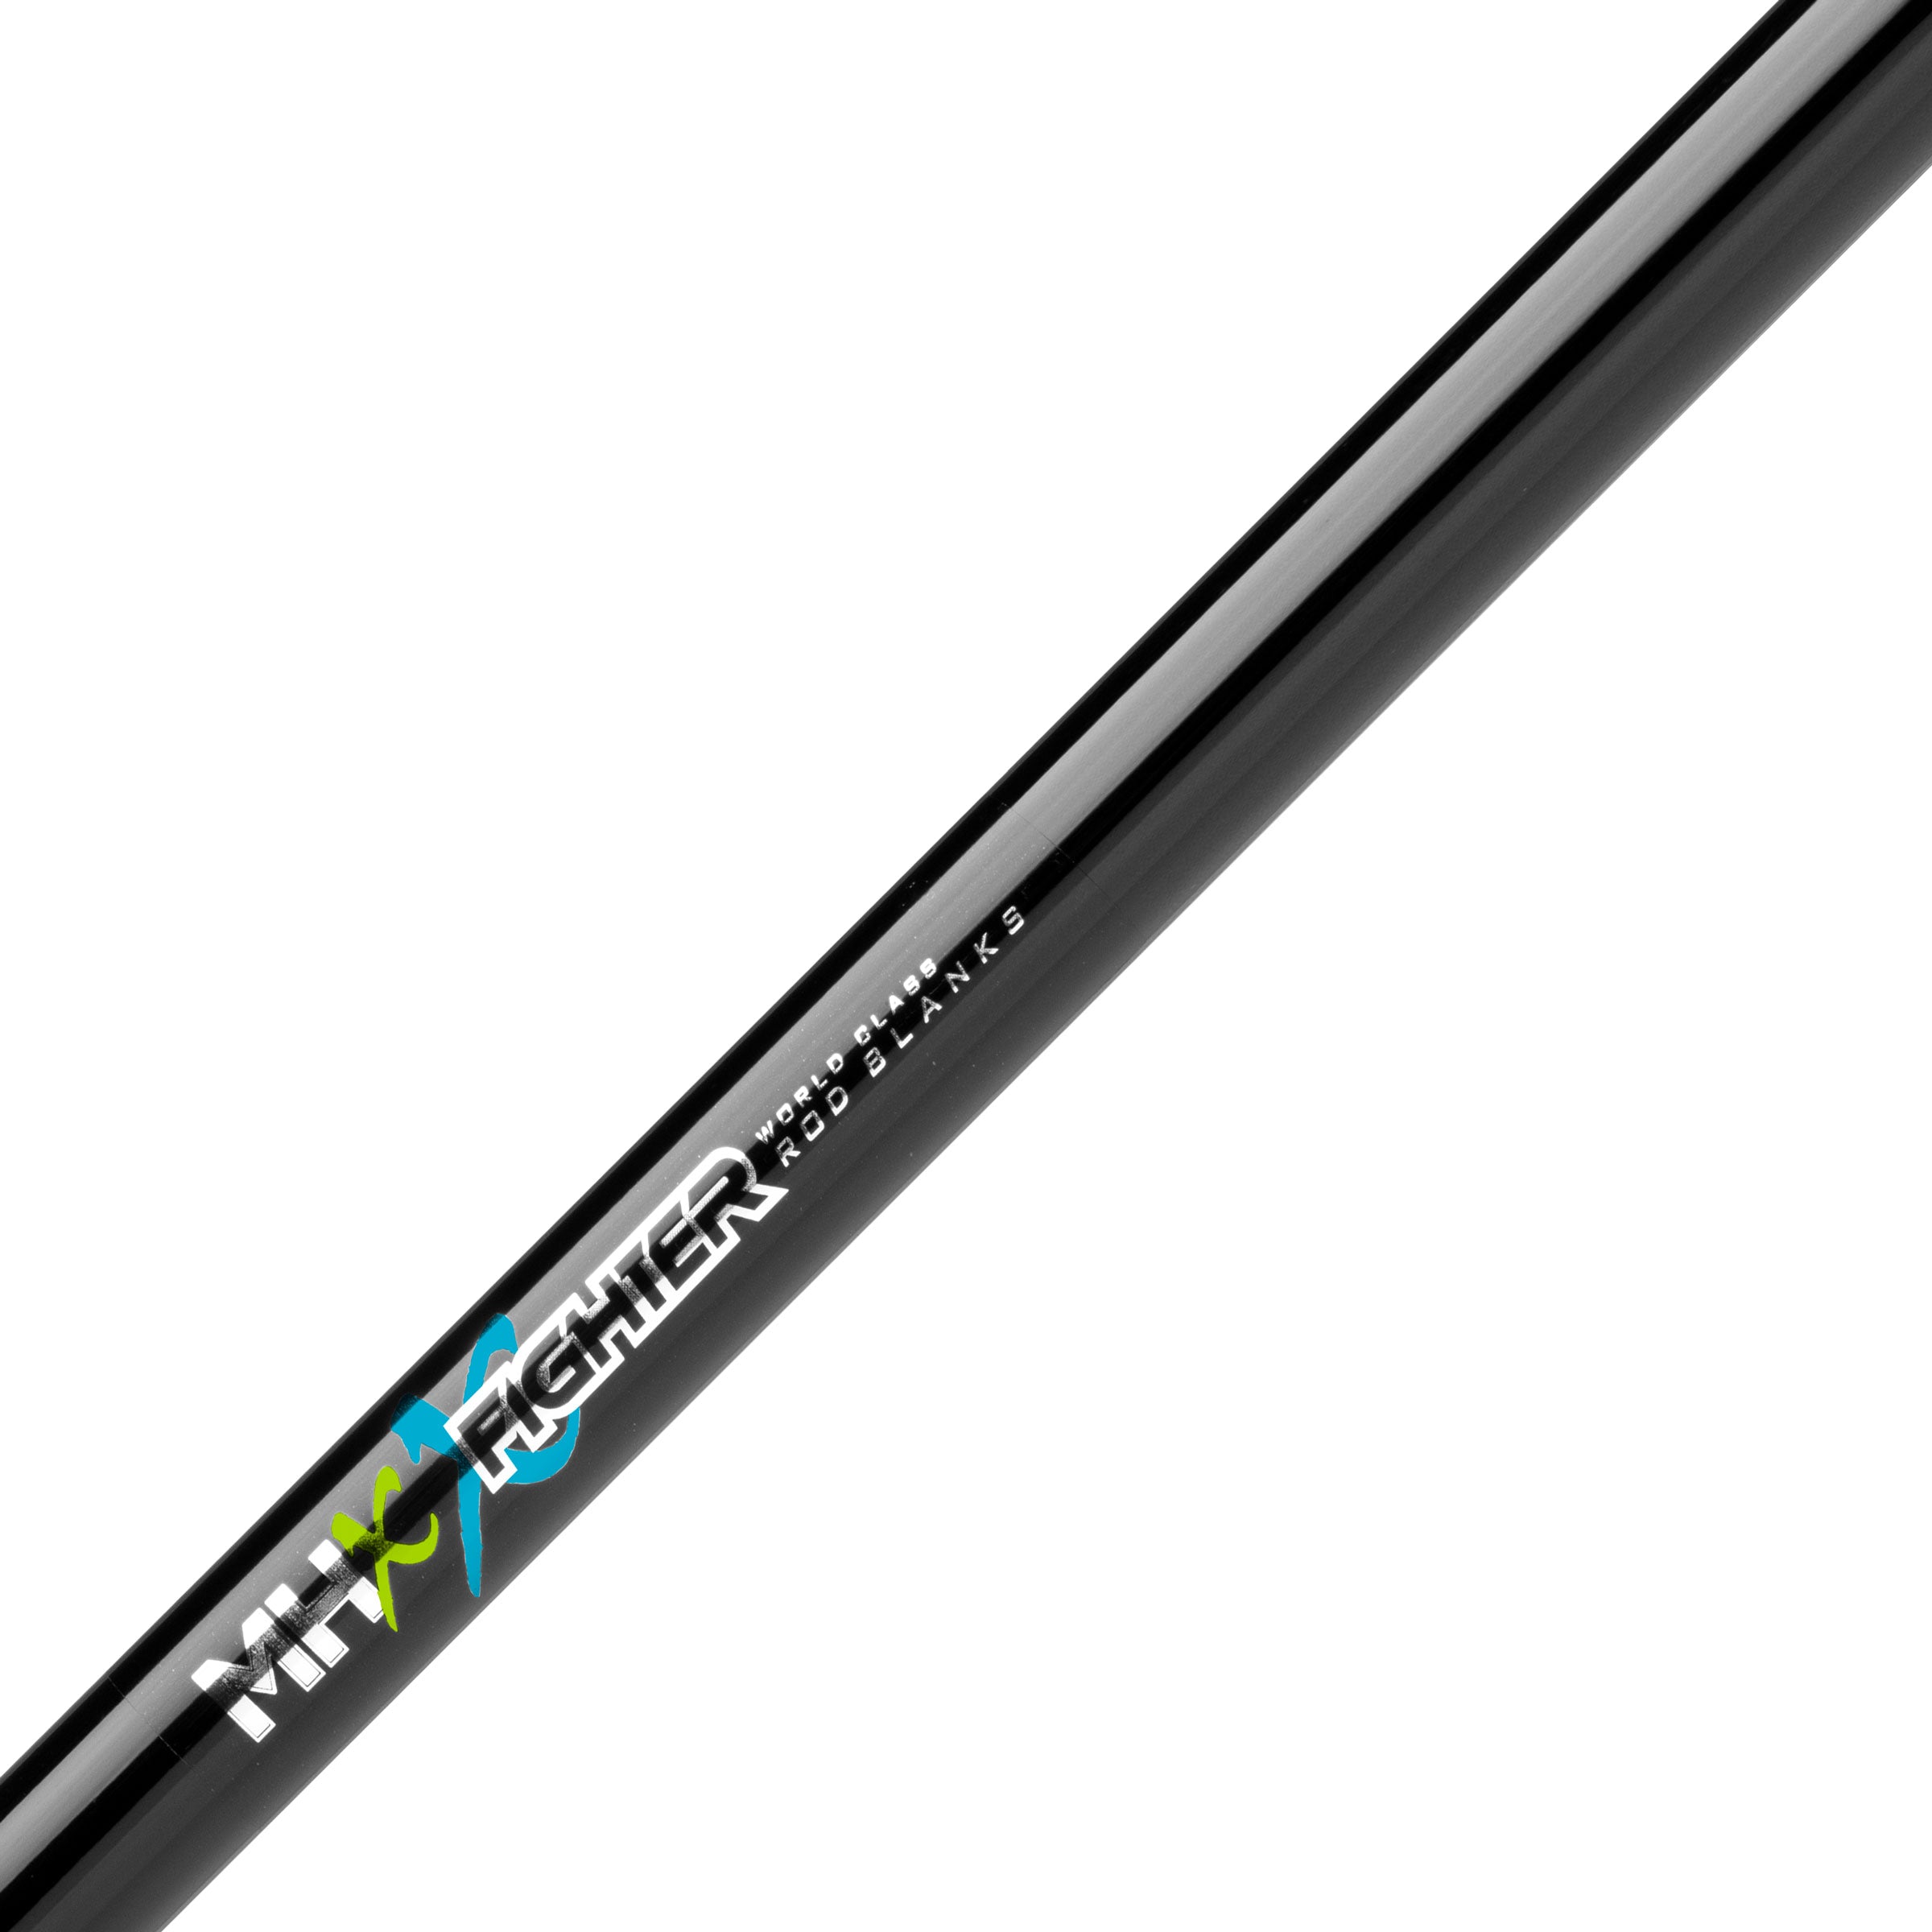 MHX 4'10" Heavy X-Fighter Offshore Graphite Composite Rod Blank XF410H